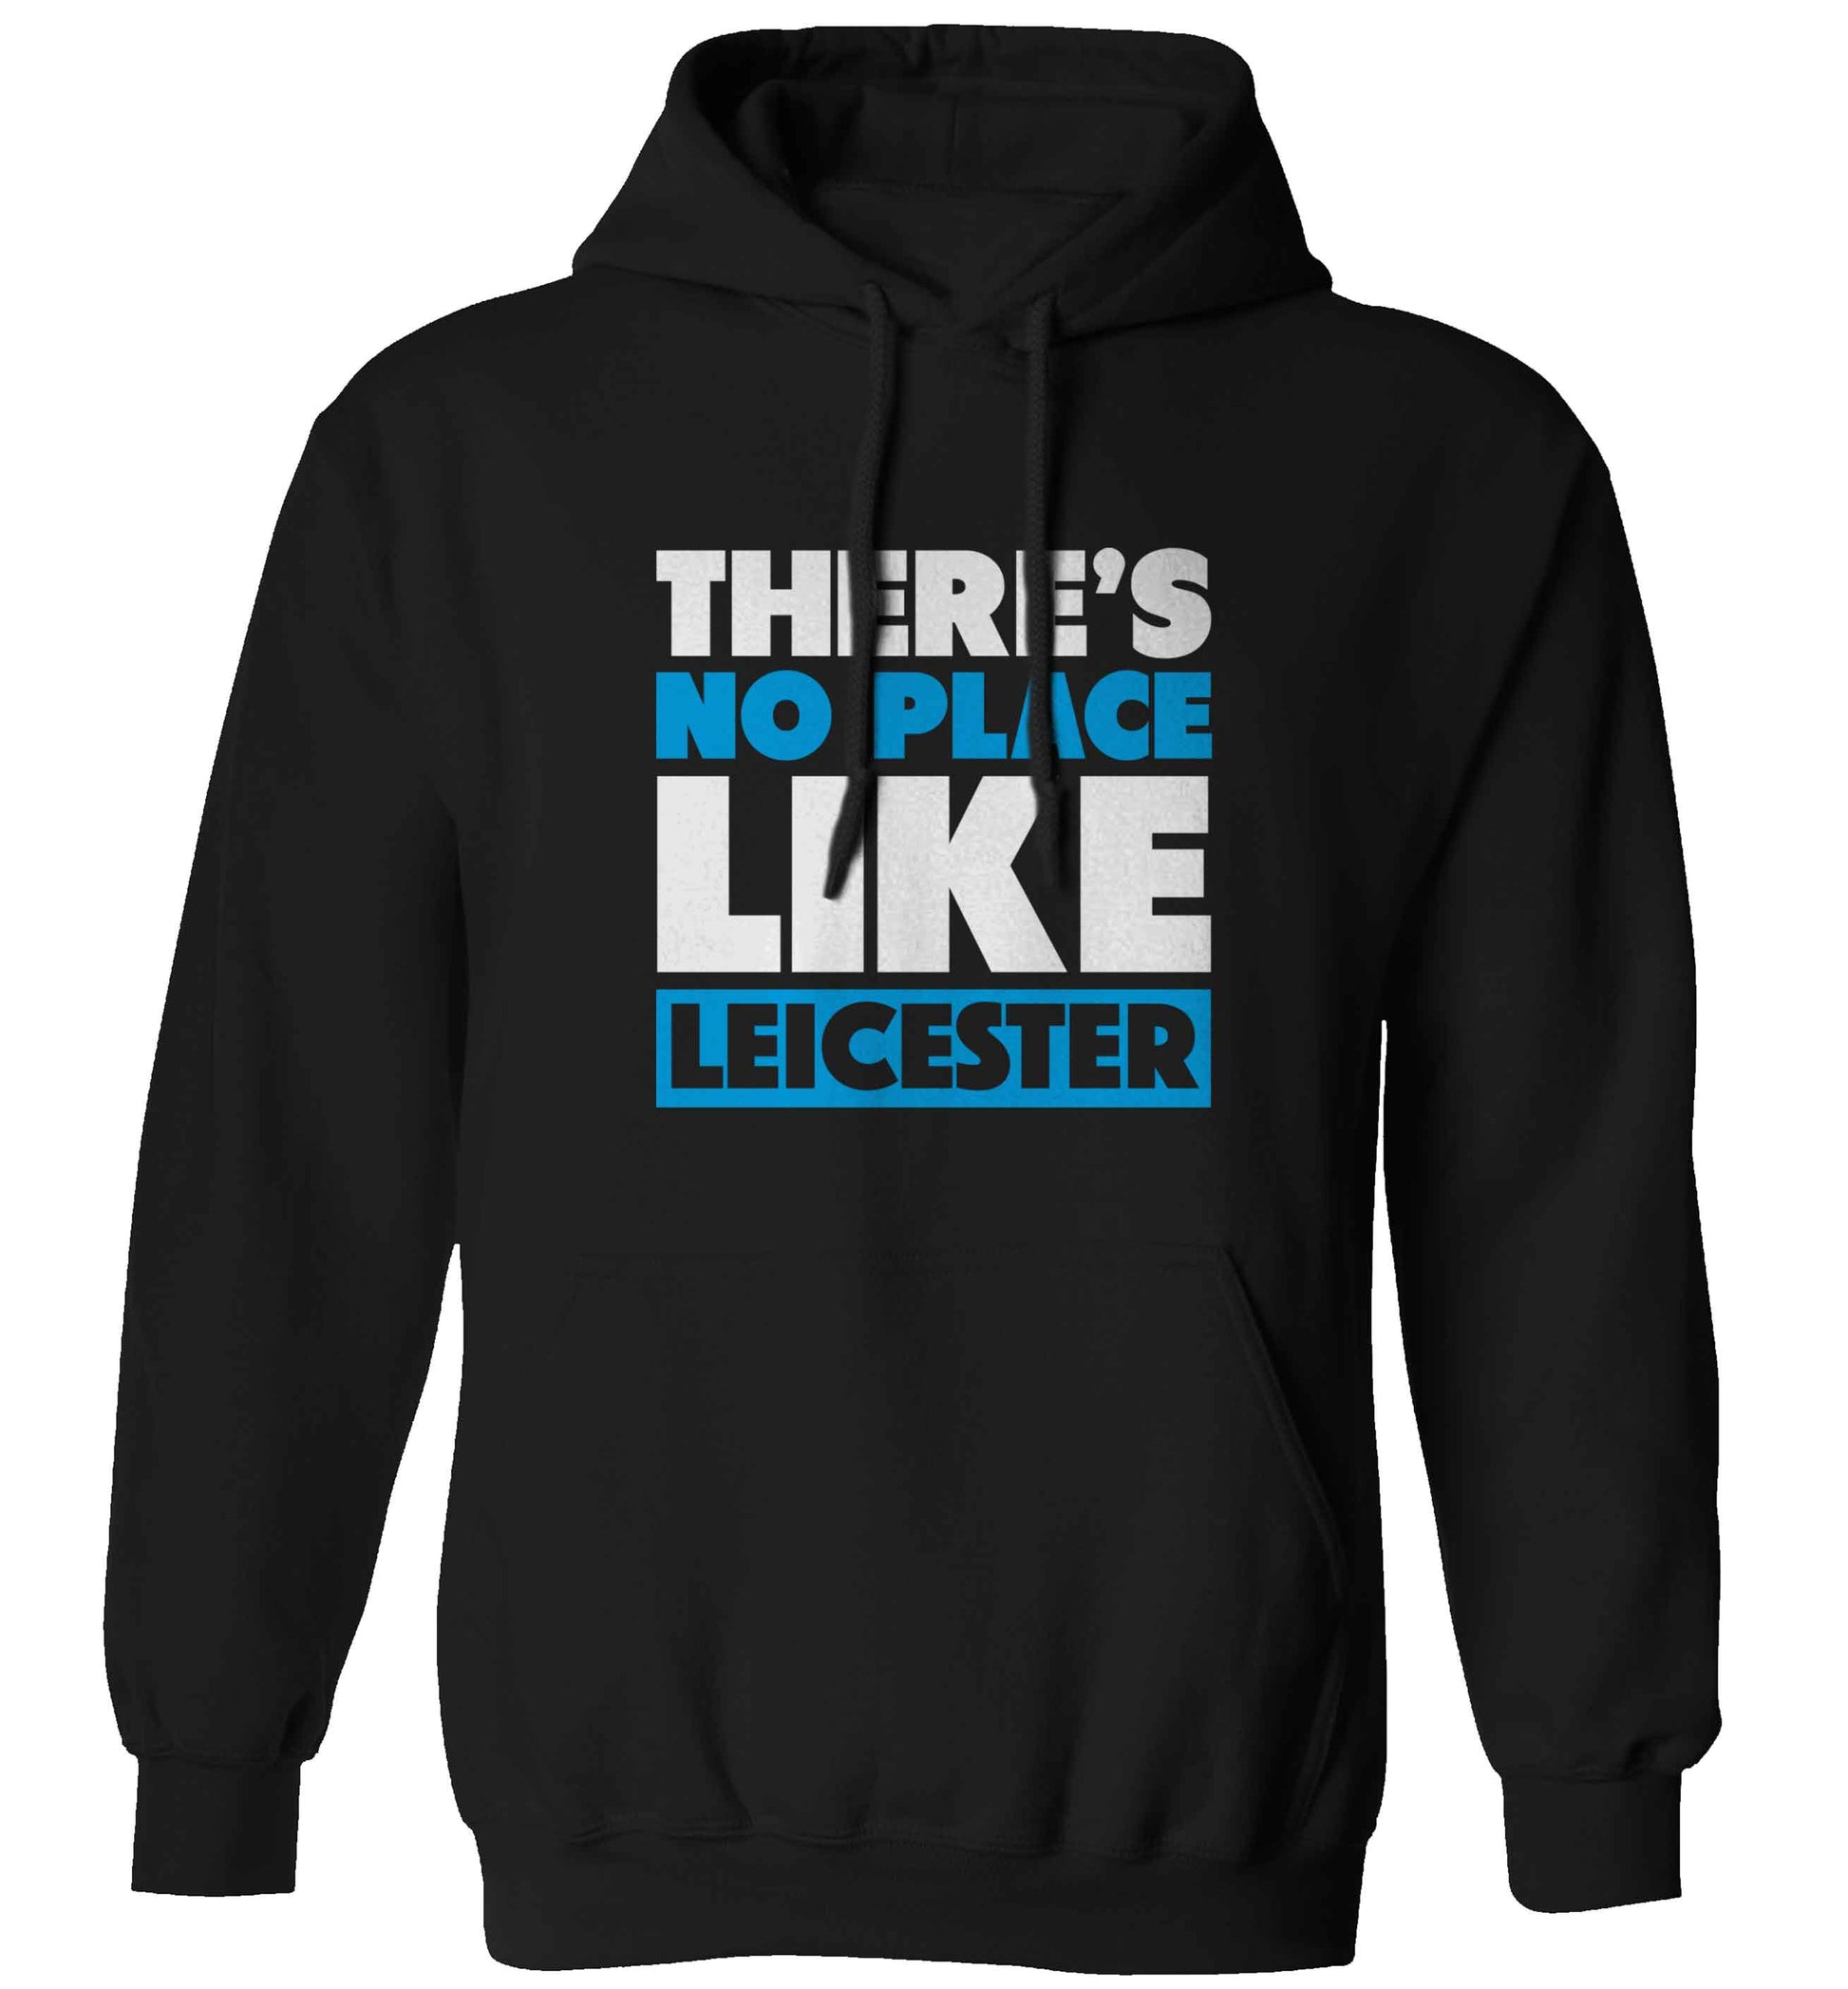 There's no place like Leicester adults unisex black hoodie 2XL